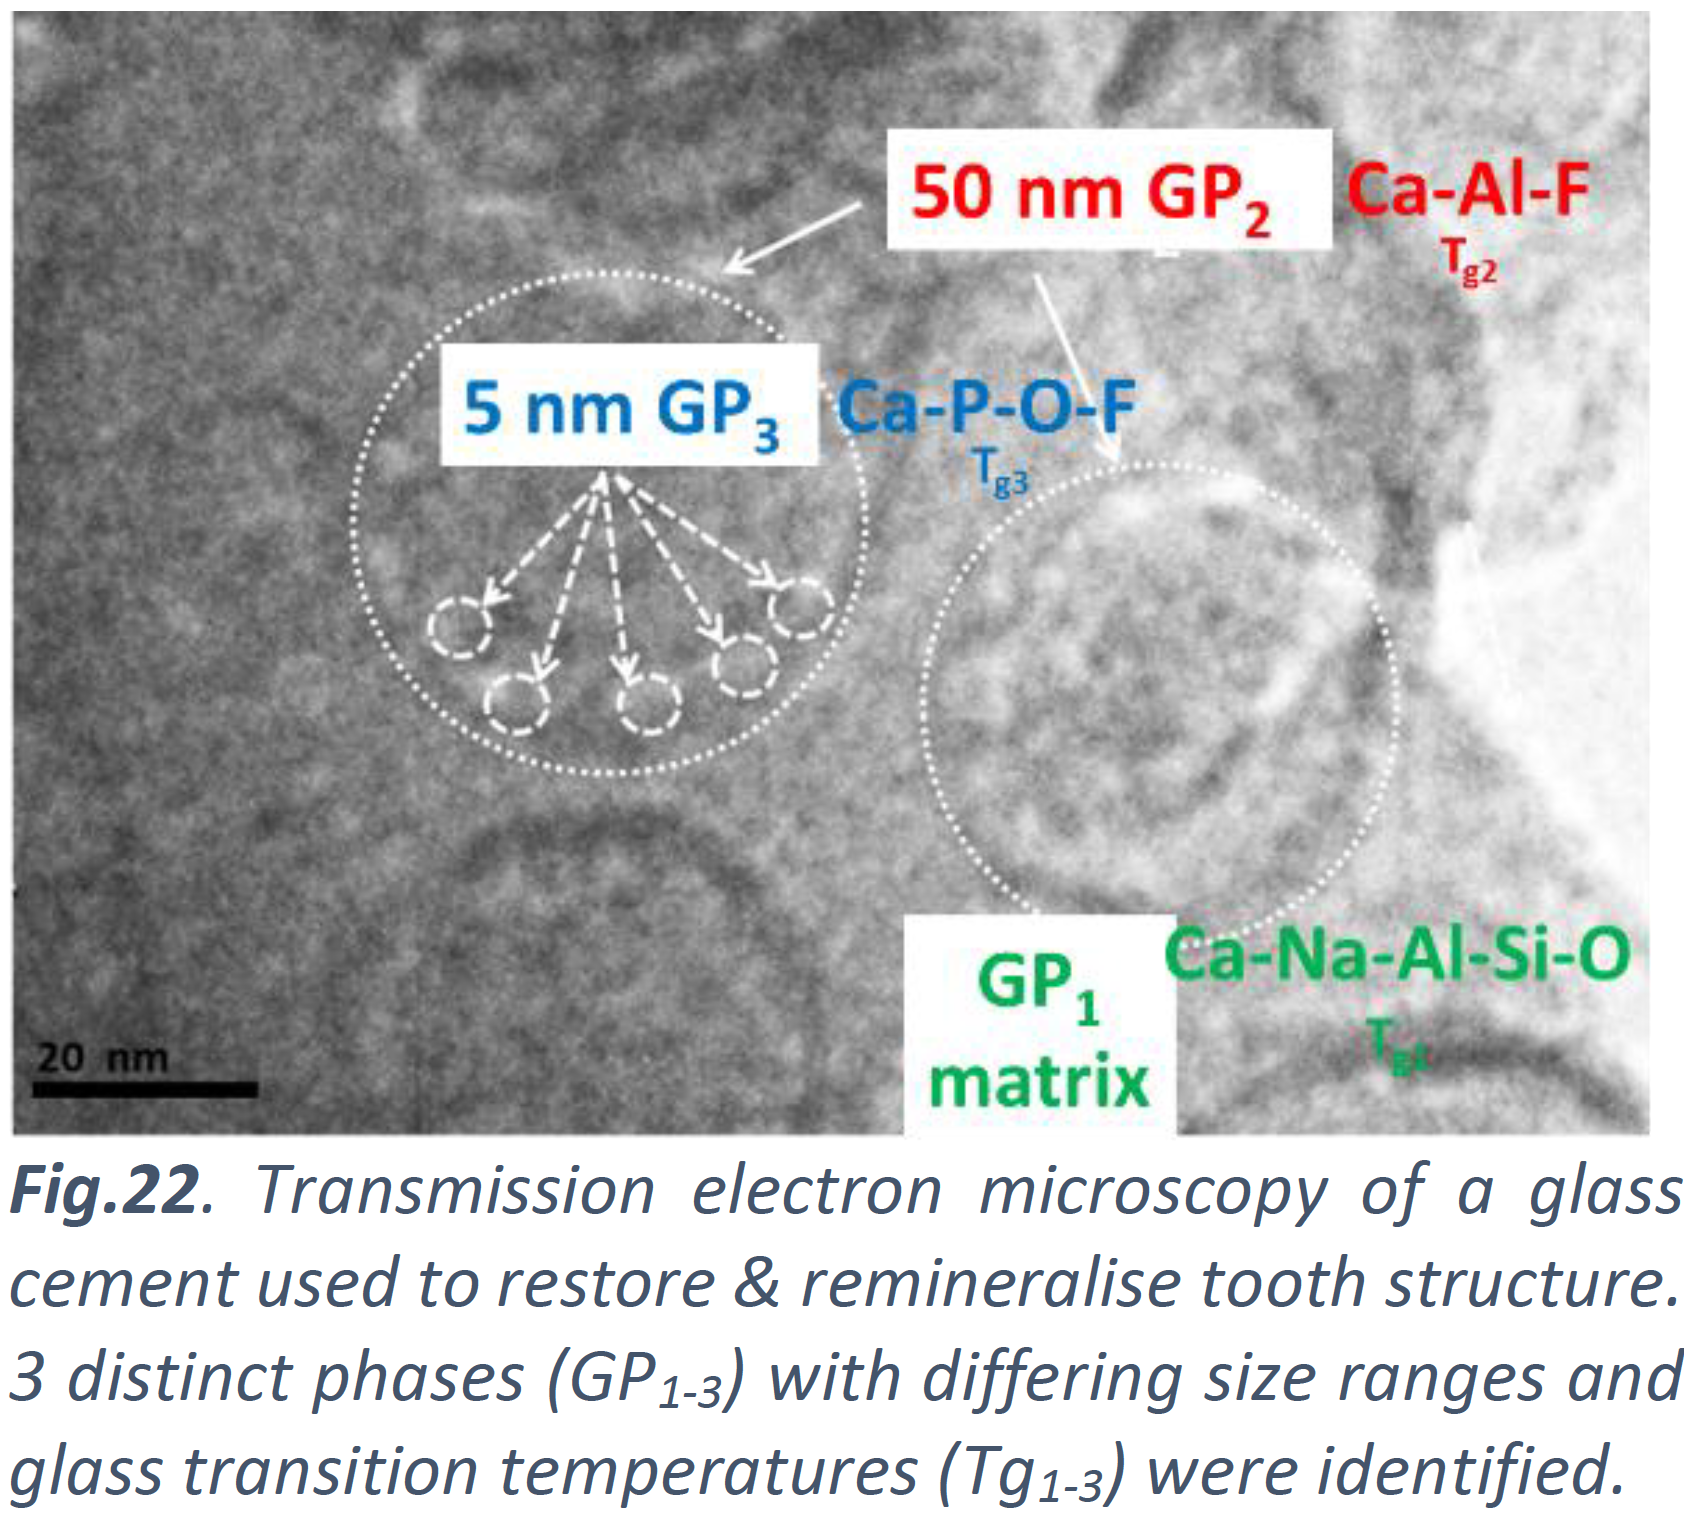 Transmission electron microscopy of a glass cement used to restore & remineralise tooth structure. 3 distinct phases with differing size ranges and glass transition temperatures were identified.